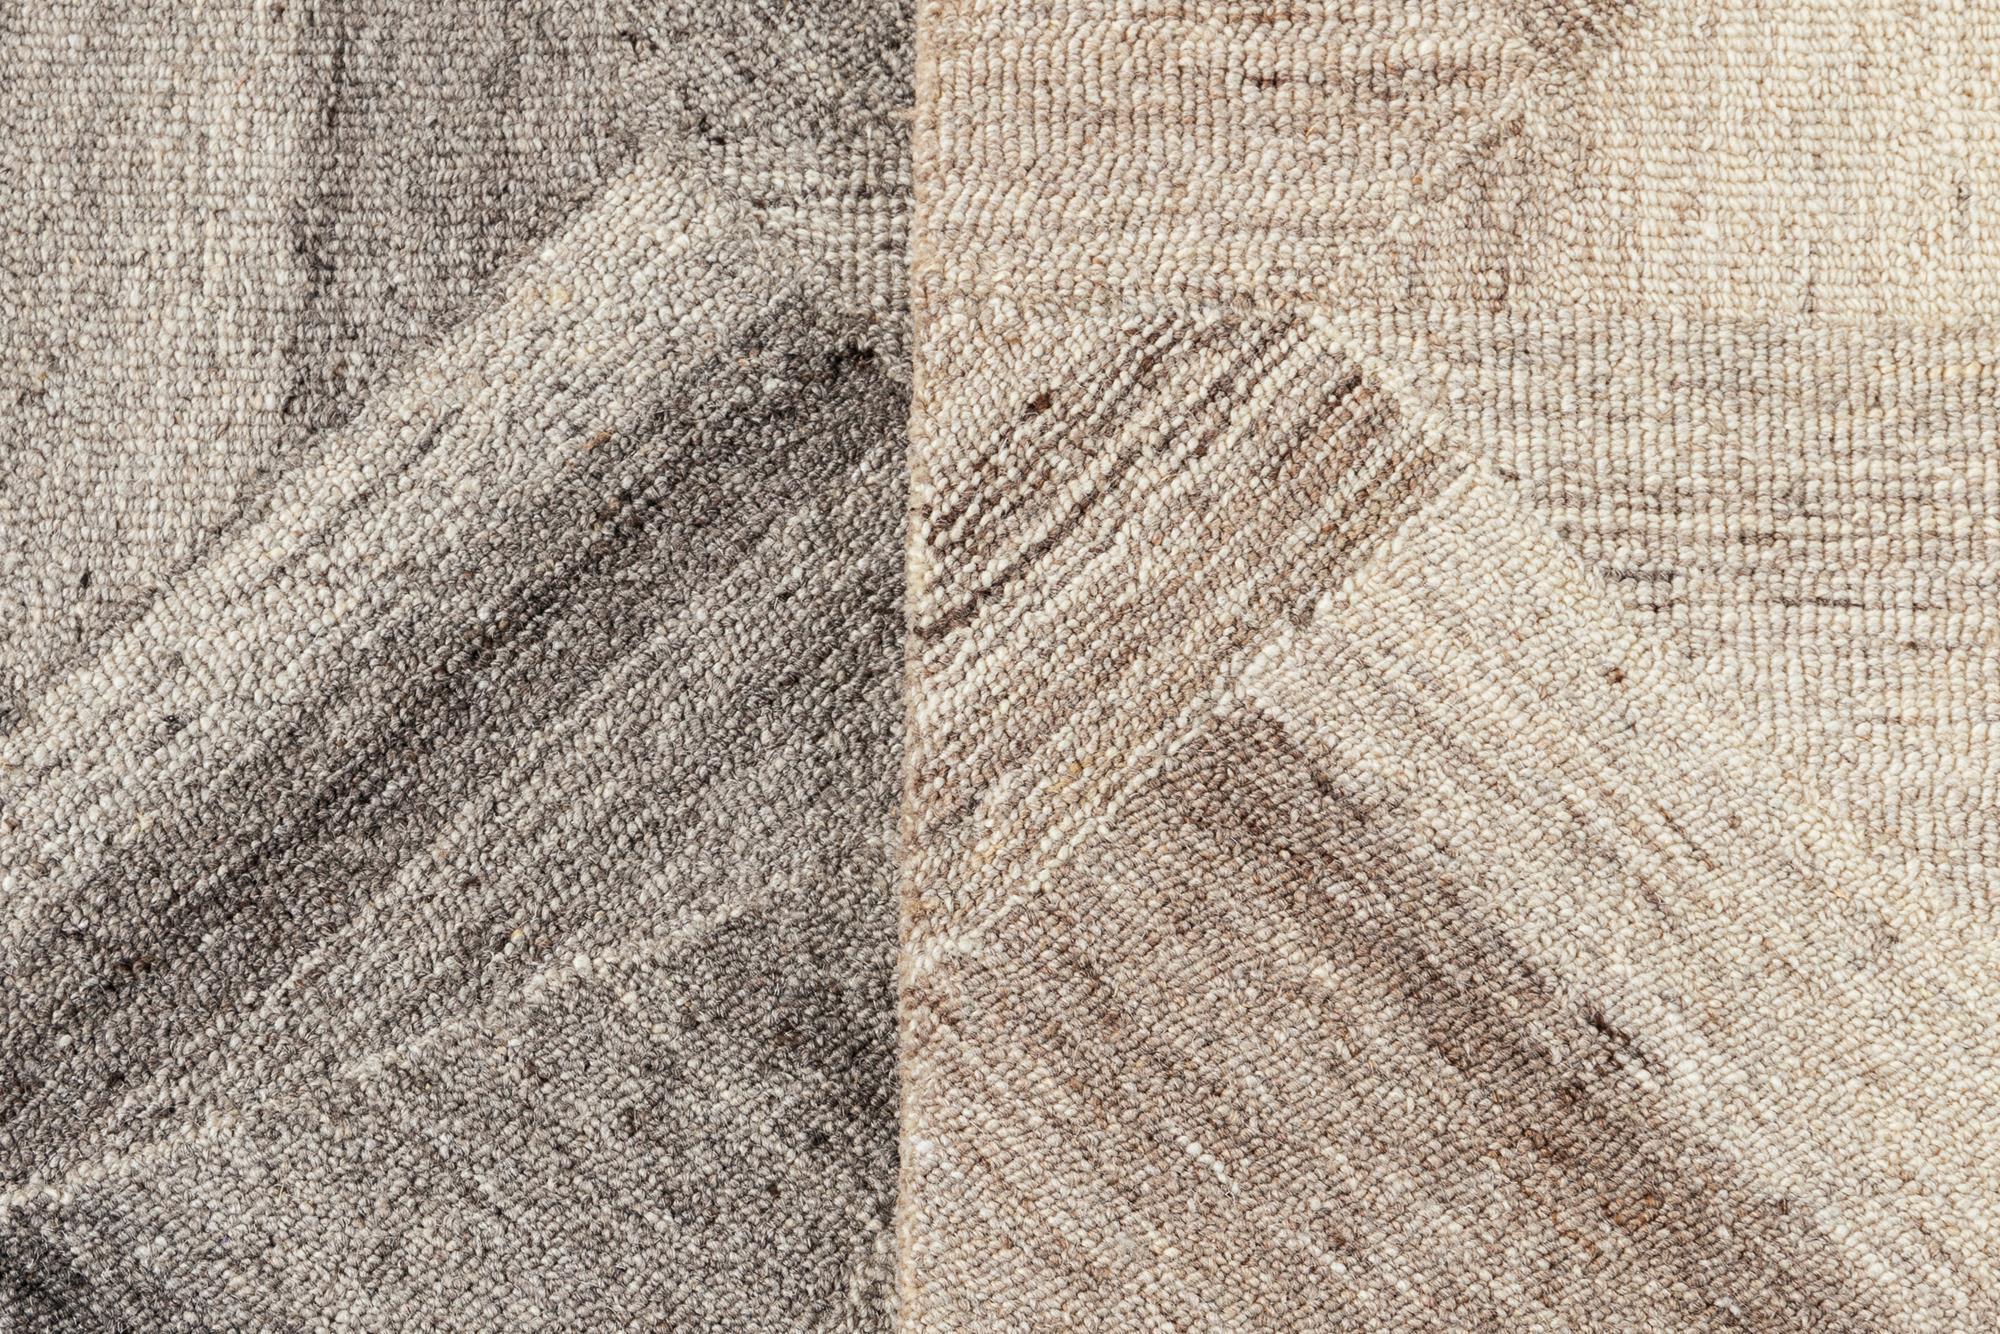 Tufted wool custom rug. Custom sizes and colors made-to-order.
 
Collection: Easton 
Material: Wool 
Lead Time: Approx. 15-20 weeks available 
Colors: 20+ shades and styles 
Made in India.
Price listed is for an 8' x 10' rug.